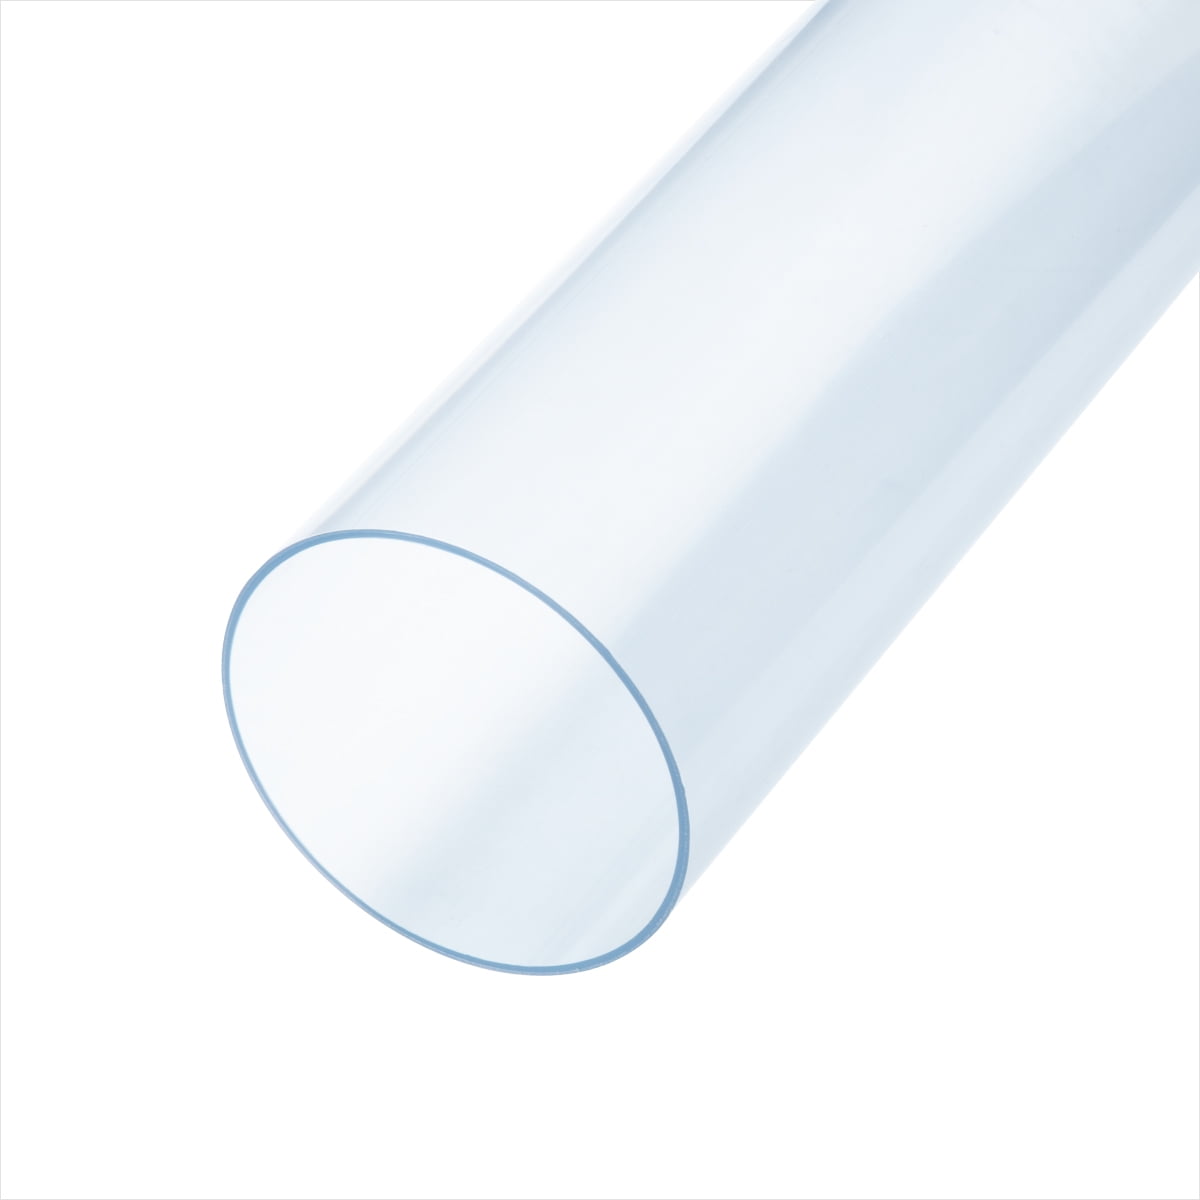 POWERTEC 4-inch x 36-Inch Long, Clear PVC Dust Collection Pipe